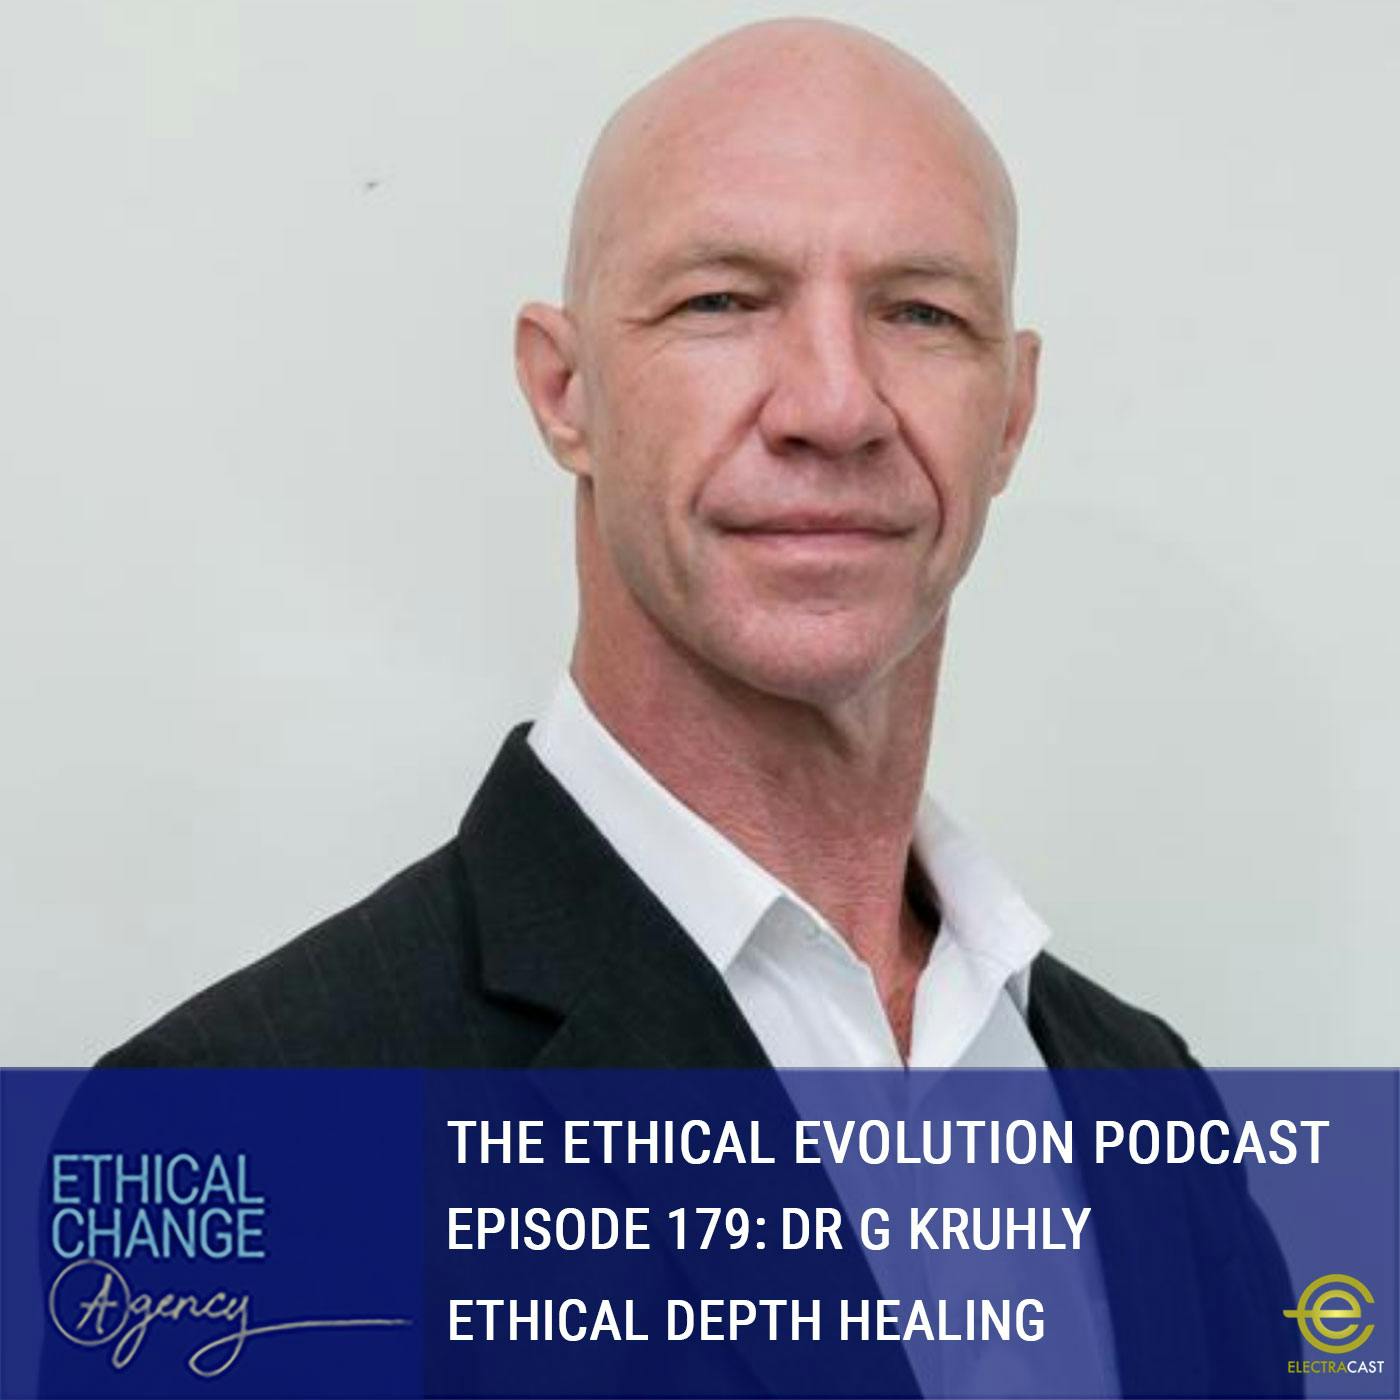 Ethical Depth Healing with Dr G Kruhly